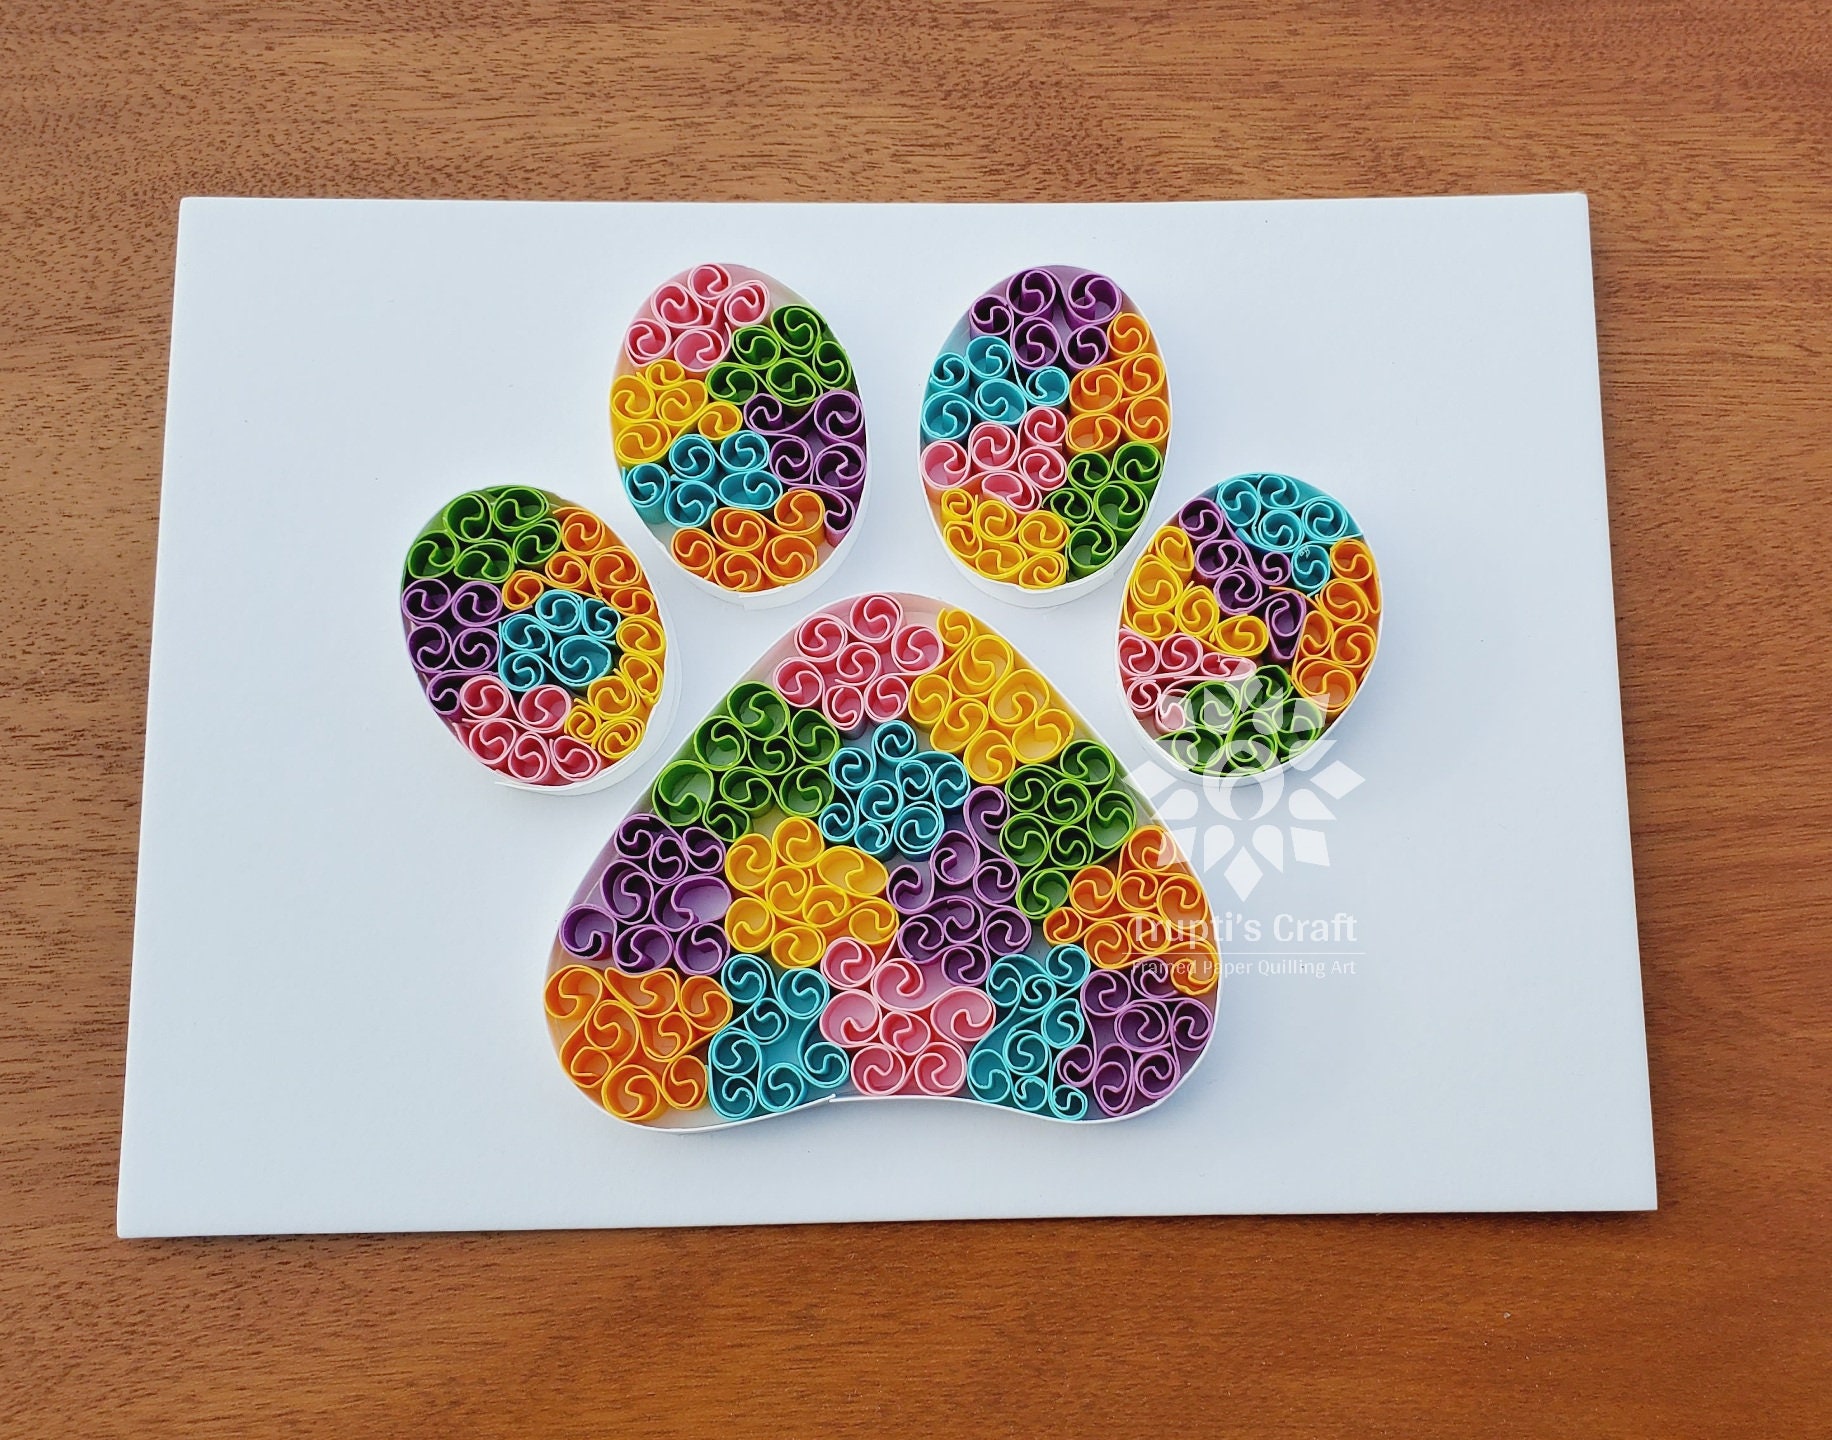 Quilling Kit for Paw Print Frame